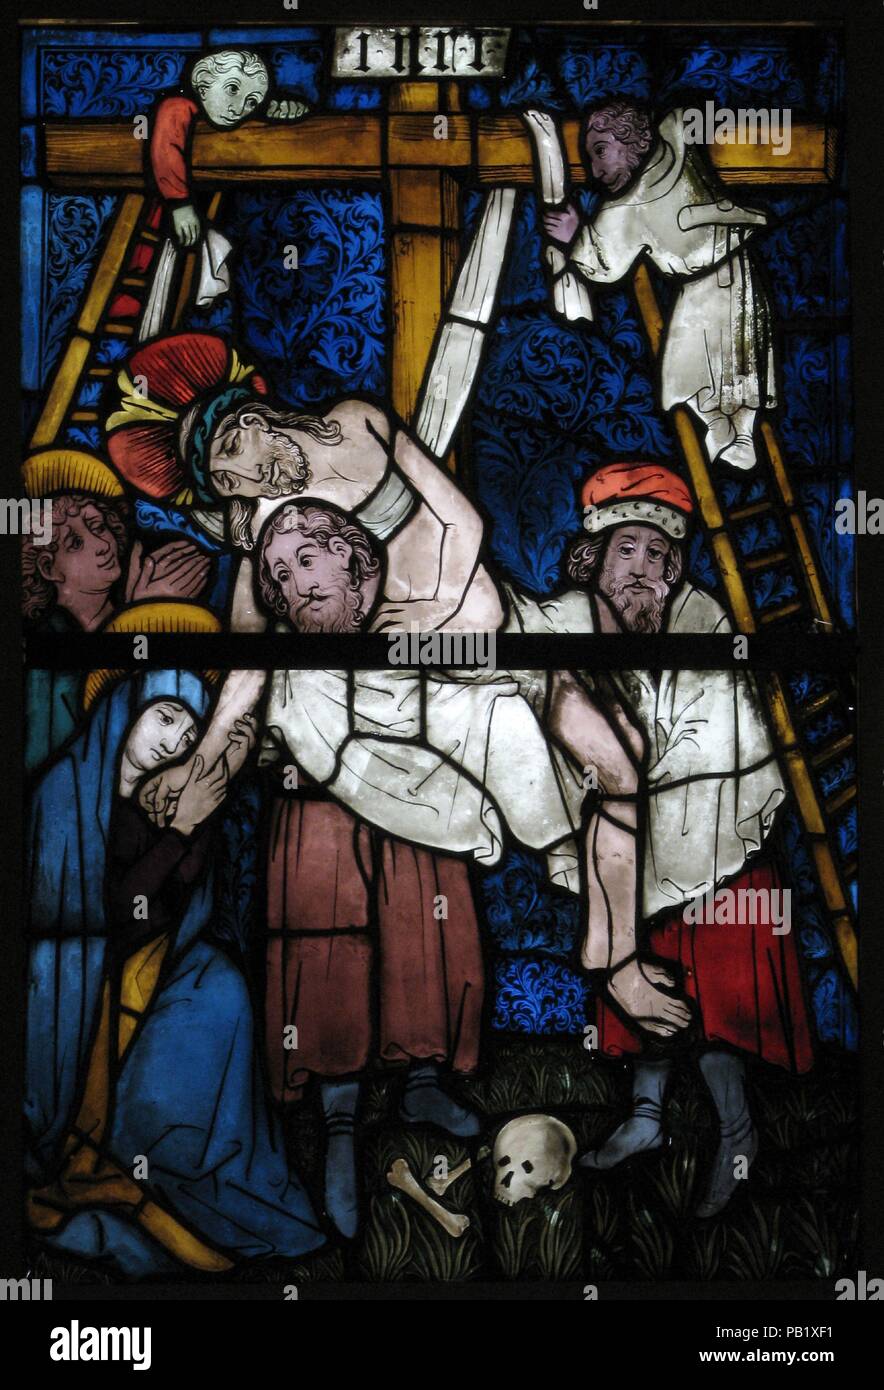 Stained Glass Panel with the Deposition. Culture: German. Dimensions: Overall (with 1 T-bar): 43 1/2 x 29 5/16 x 3/8 in. (110.5 x 74.5 x 1 cm)  Overall (installation opening): 41 3/4 x 28 3/8 in. (106 x 72.1 cm)  a: 21 7/8 x 29 1/4 x 3/8 in. (55.6 x 74.3 x 1 cm)  b: 21 3/4 x 29 1/4 x 3/8 in. (55.2 x 74.3 x 1 cm). Date: 15th century.  These panels were part of a window depicting the ancestry of Christ in the form of a Tree of Jesse (a complete example is shown opposite).  The painter of these windows adopted an angular style of drapery folds and subtle color juxtapositions initiating a new styl Stock Photo